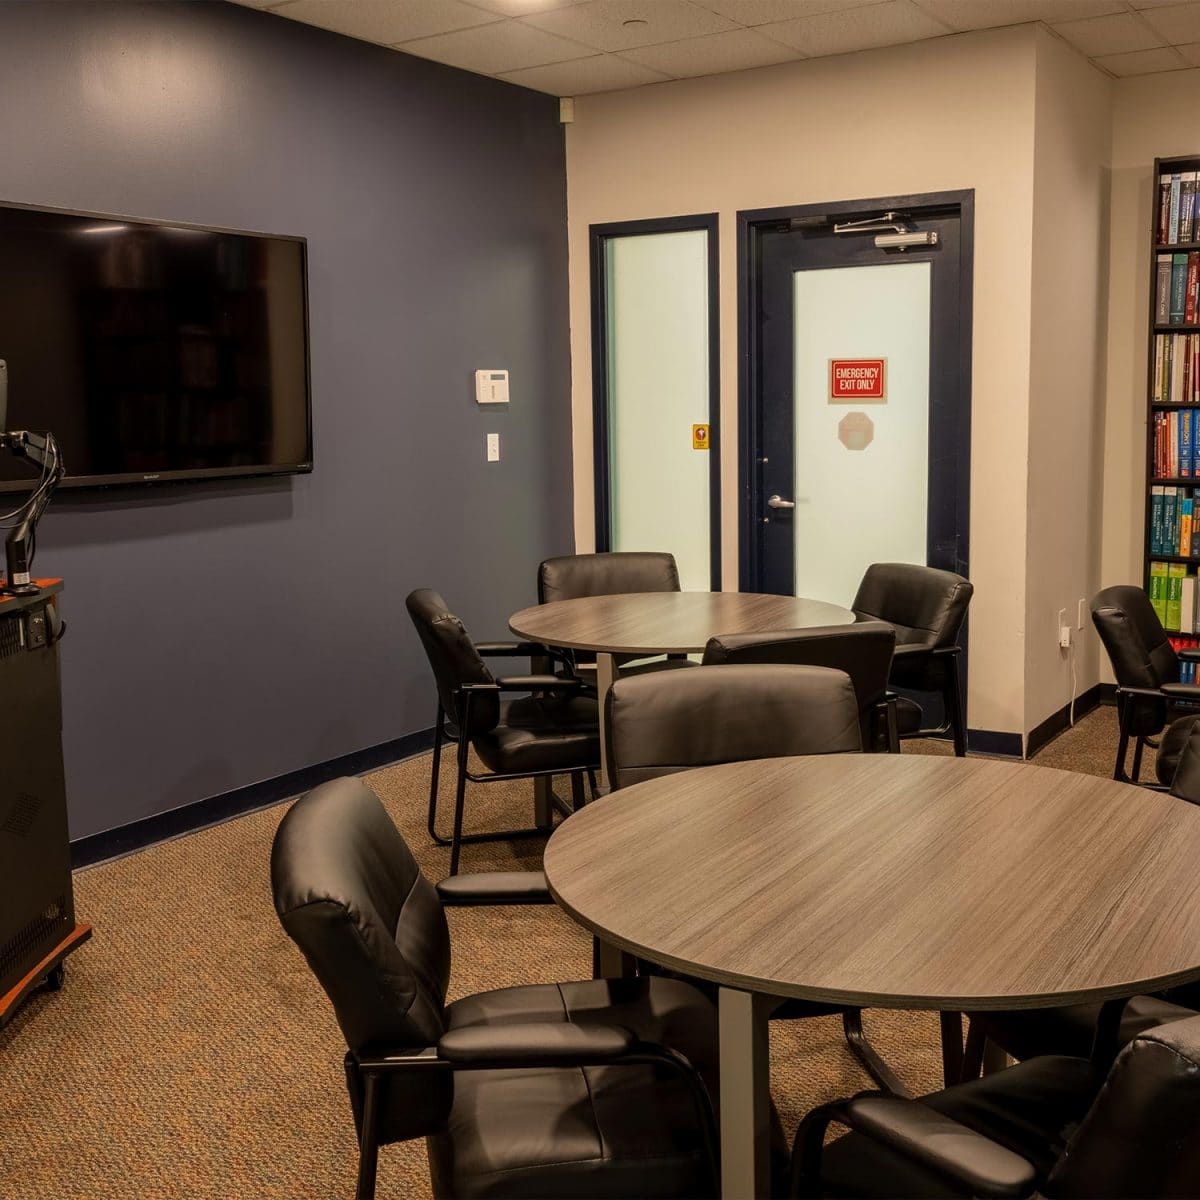 Take a virtual tour of CFM’s exceptional learning environment.